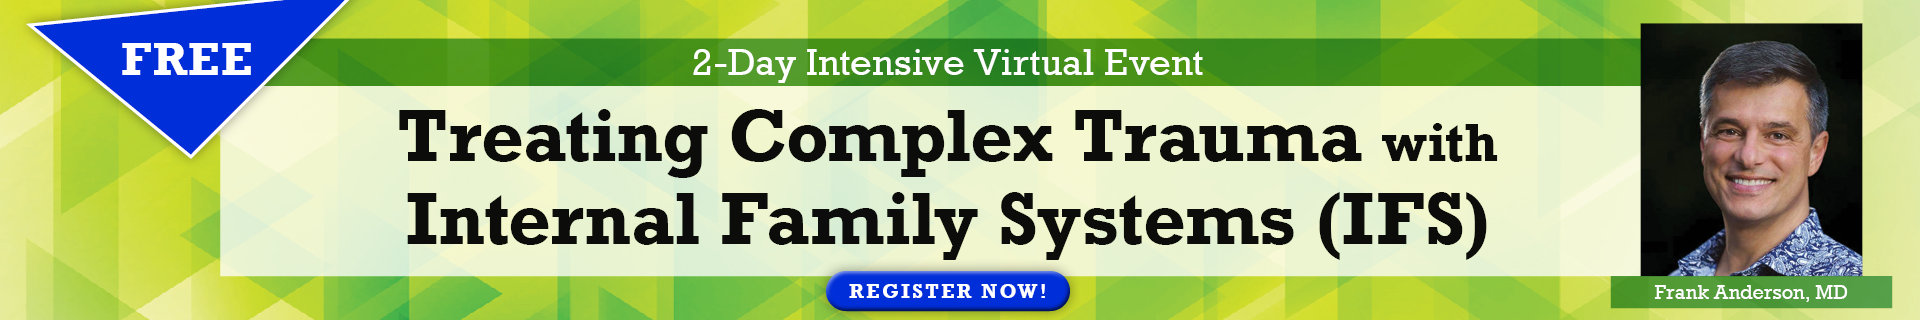 2-Day Intensive Workshop: Treating Complex Trauma with Internal Family Systems (IFS)